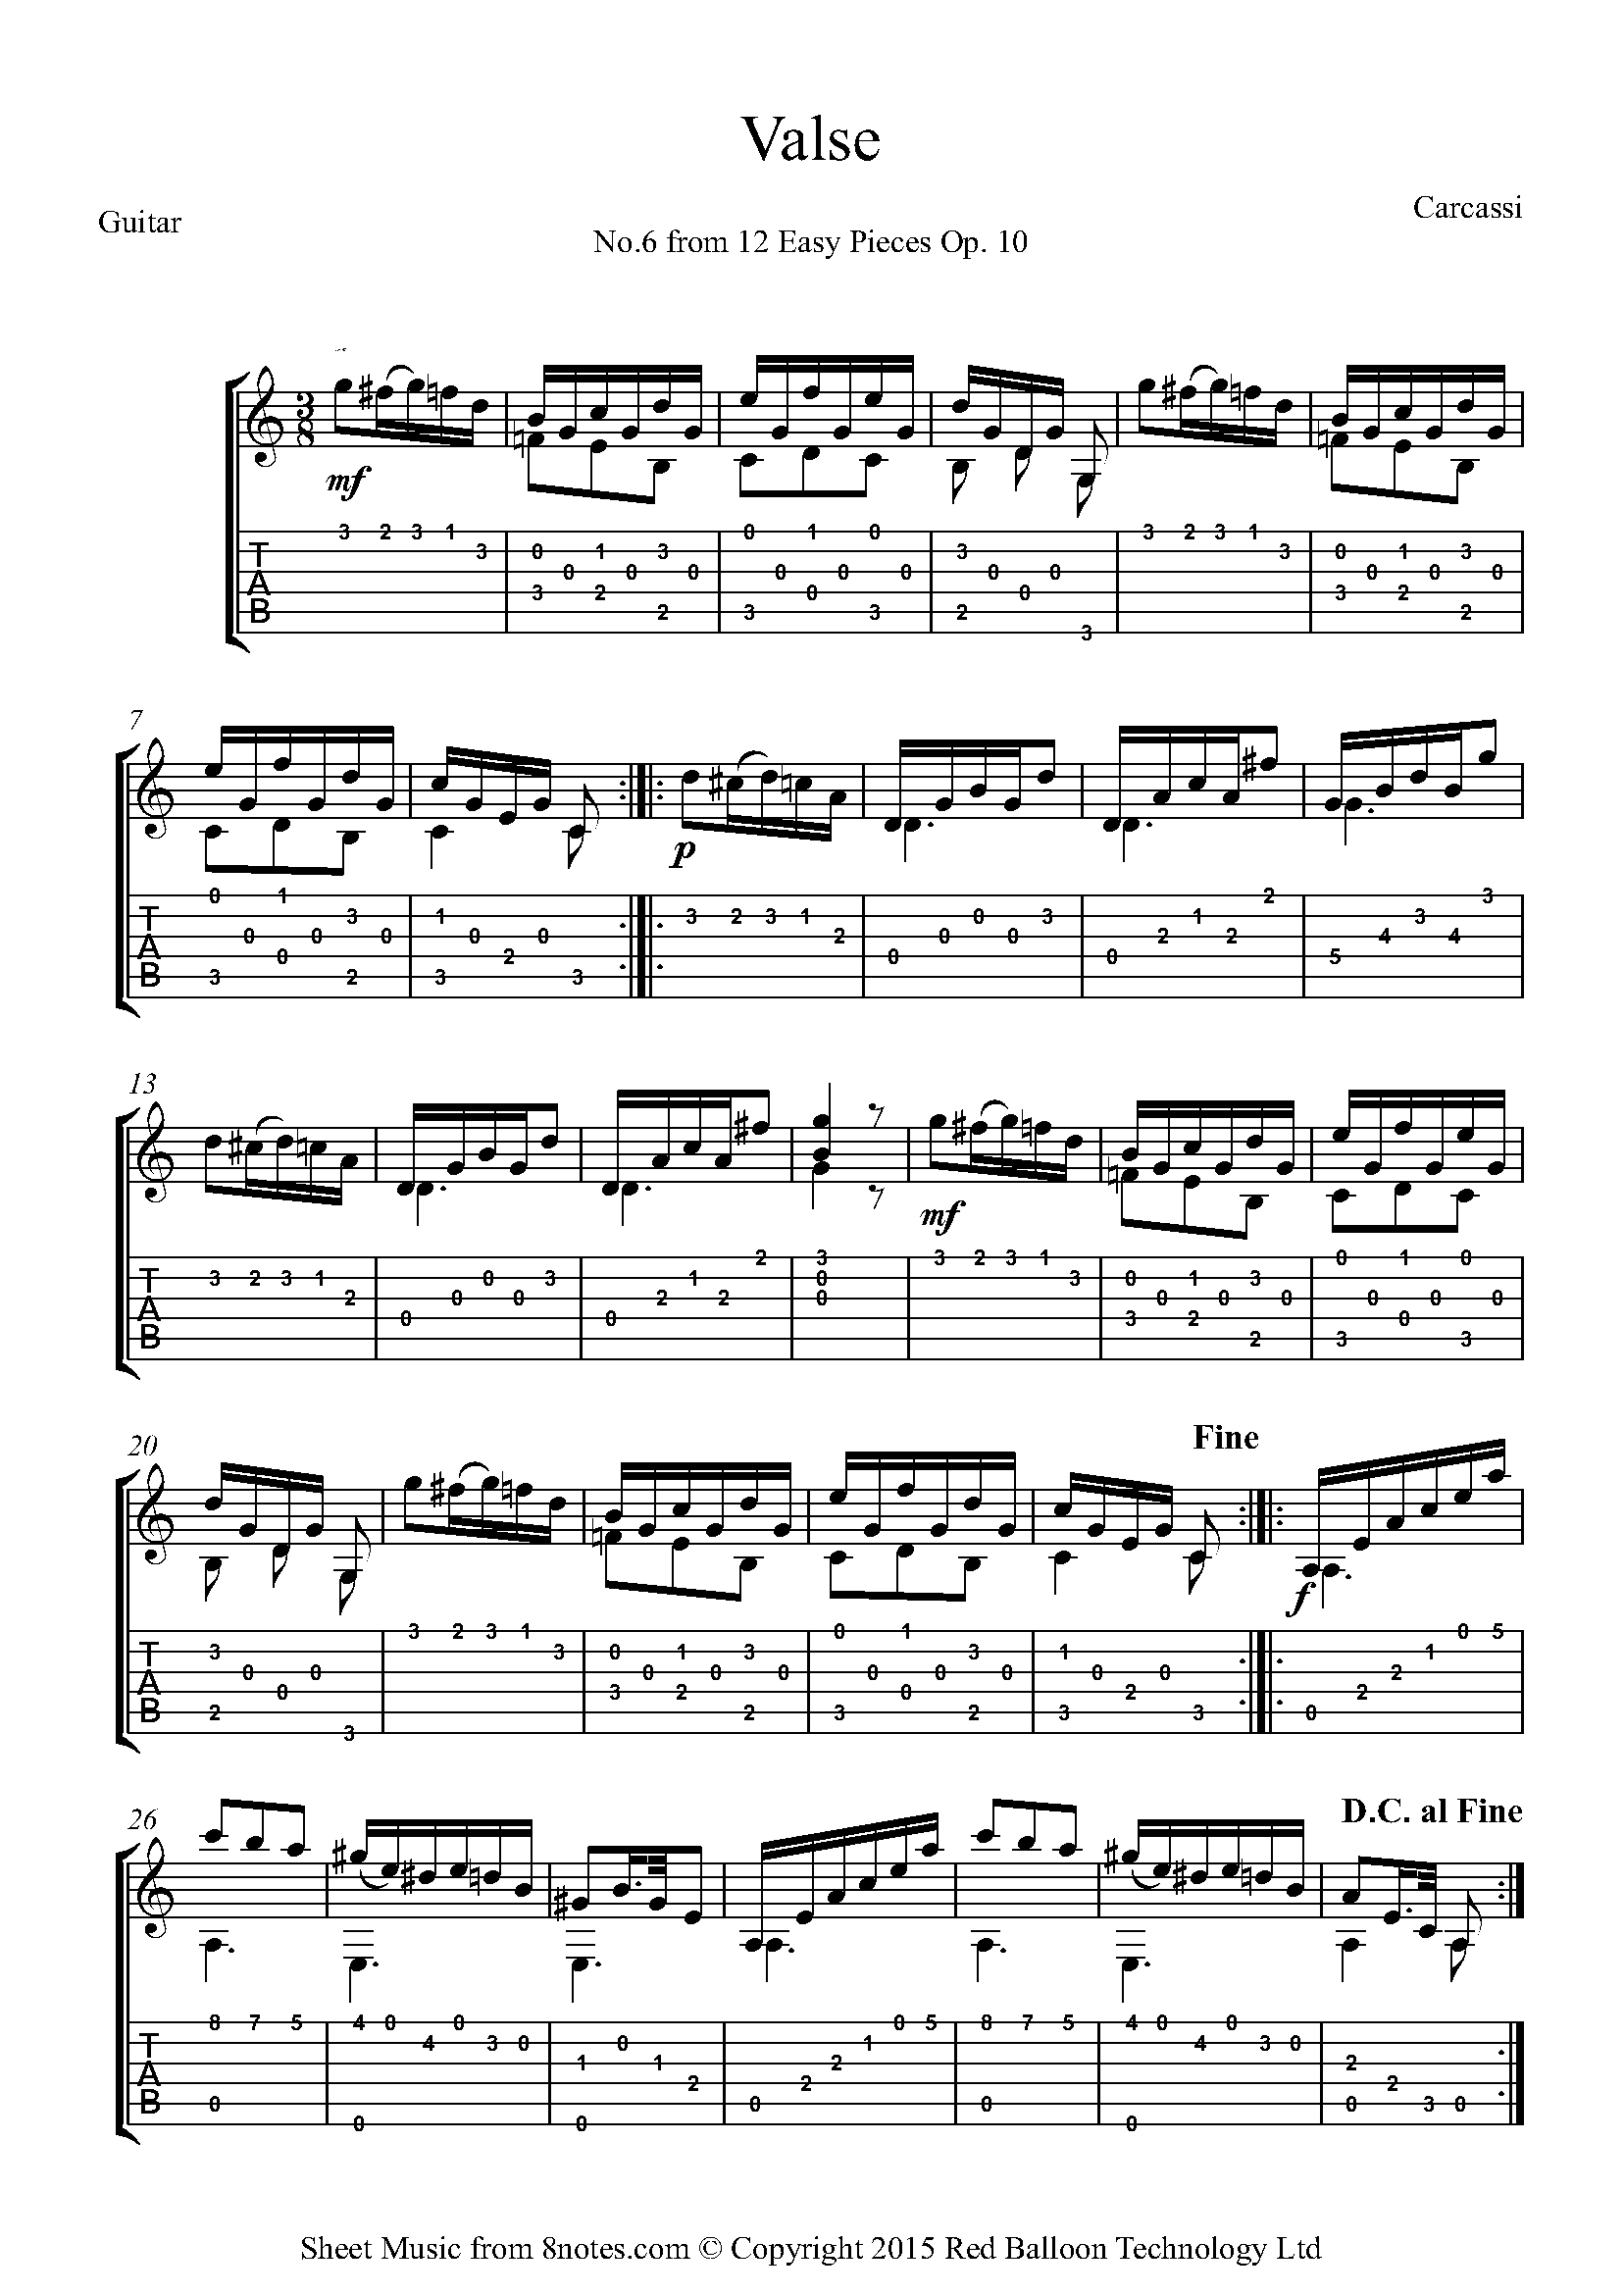 Carcassi - Valse No.6 from 12 Easy Pieces Op. 10 Sheet music for Guitar ...